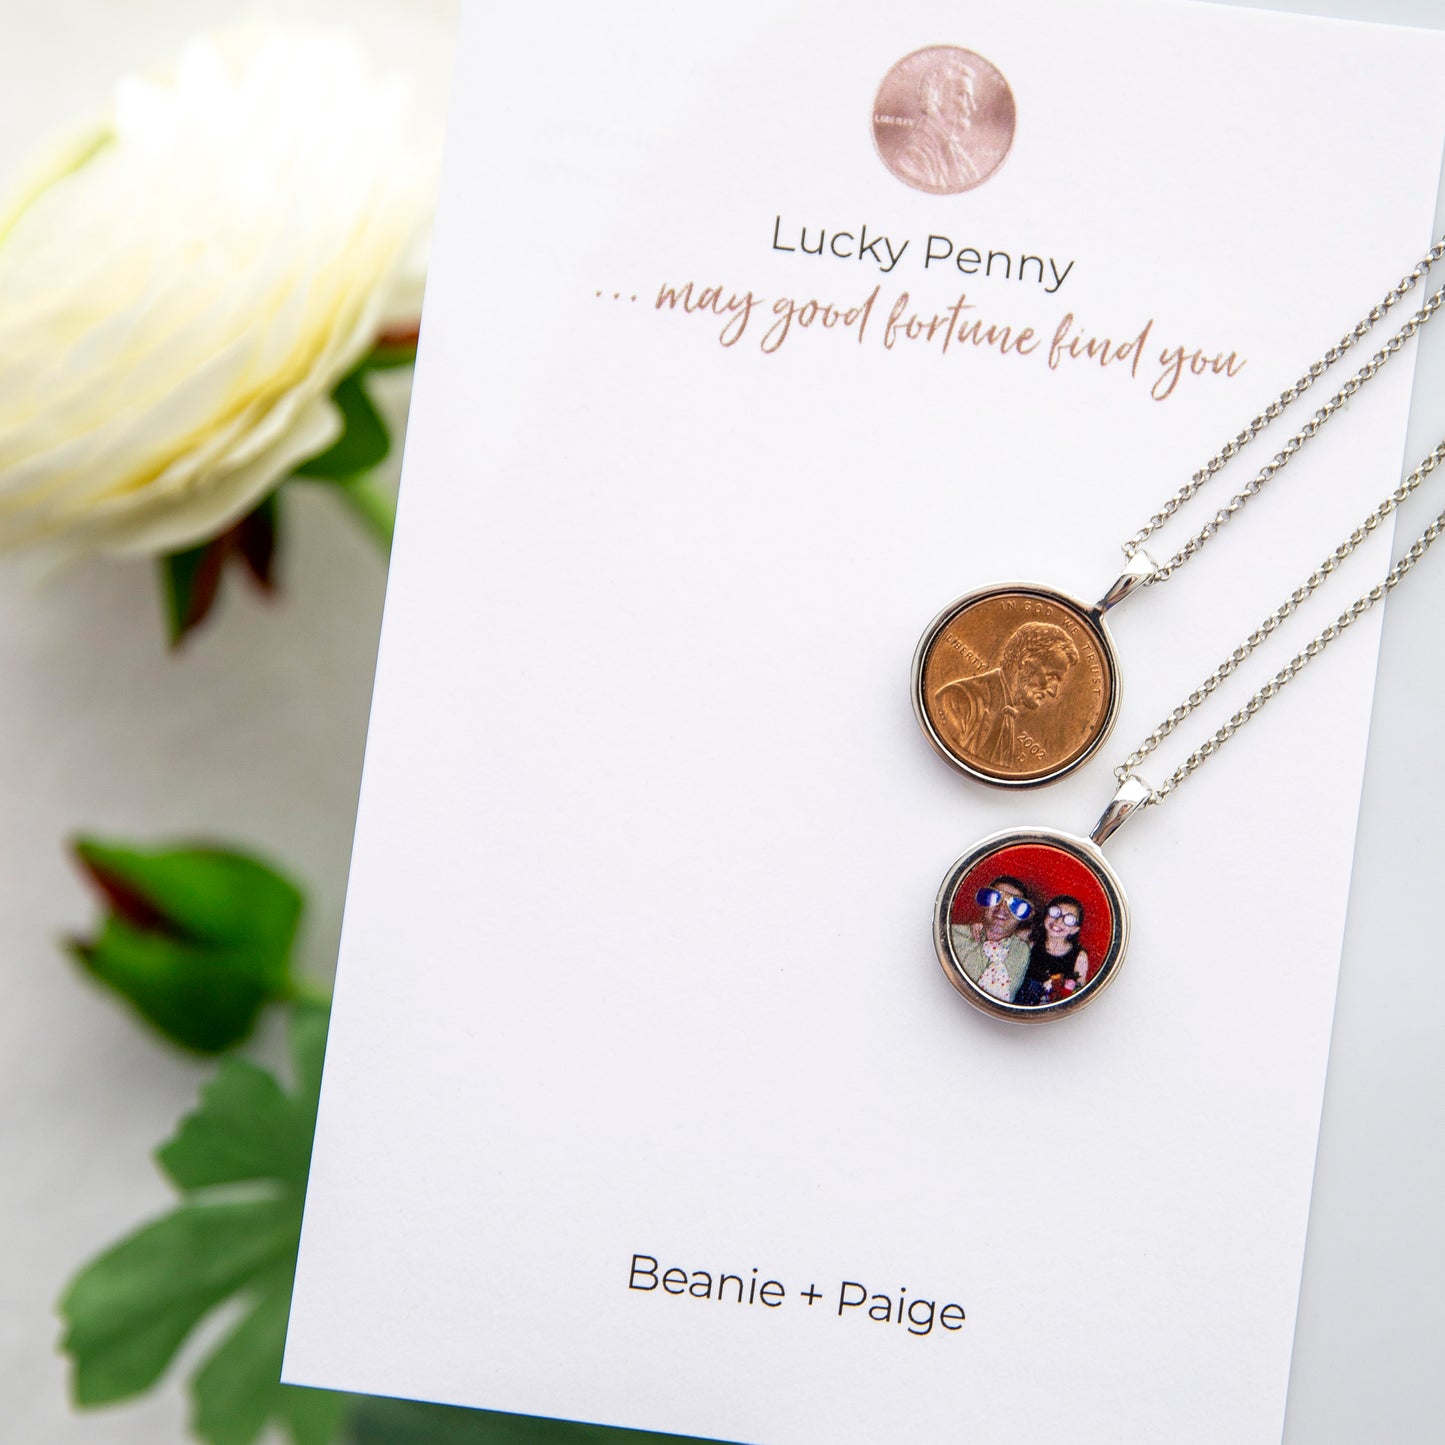 Silver Lucky Penny Personalized Necklace - image is Dad & daughter